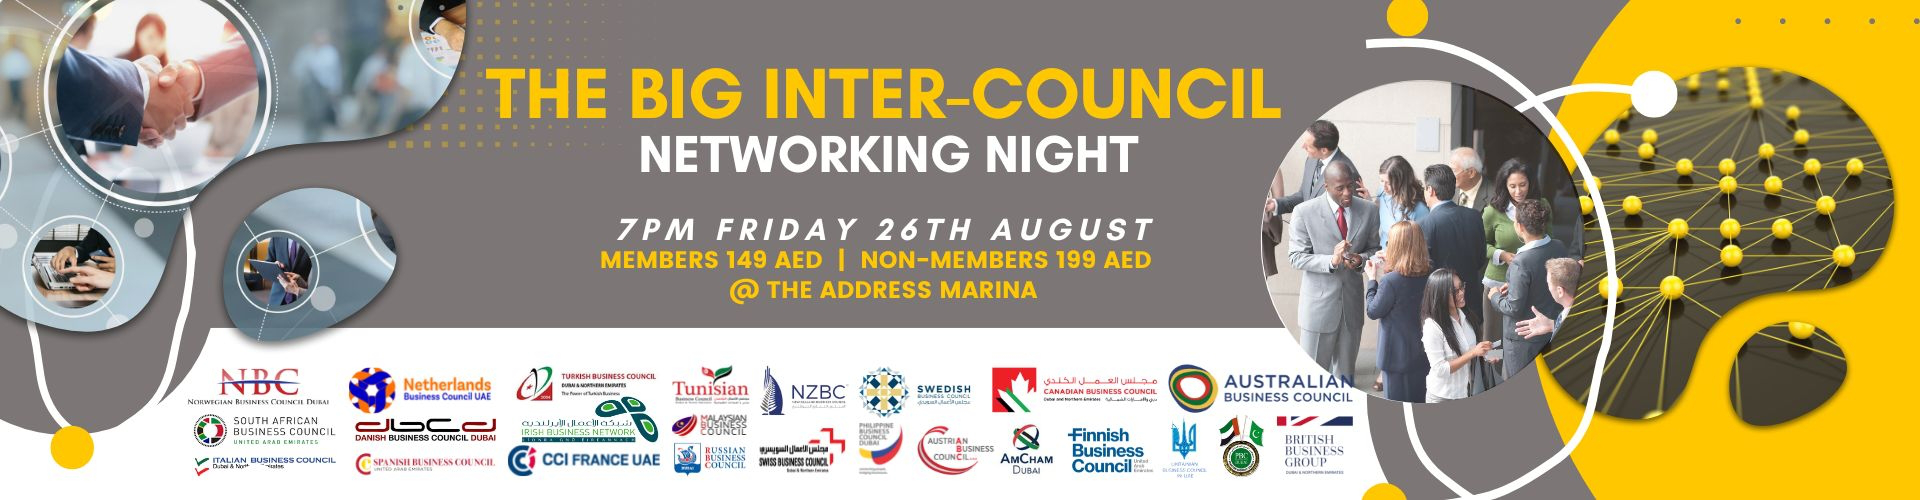 thumbnails The Big Inter-Council Networking Night